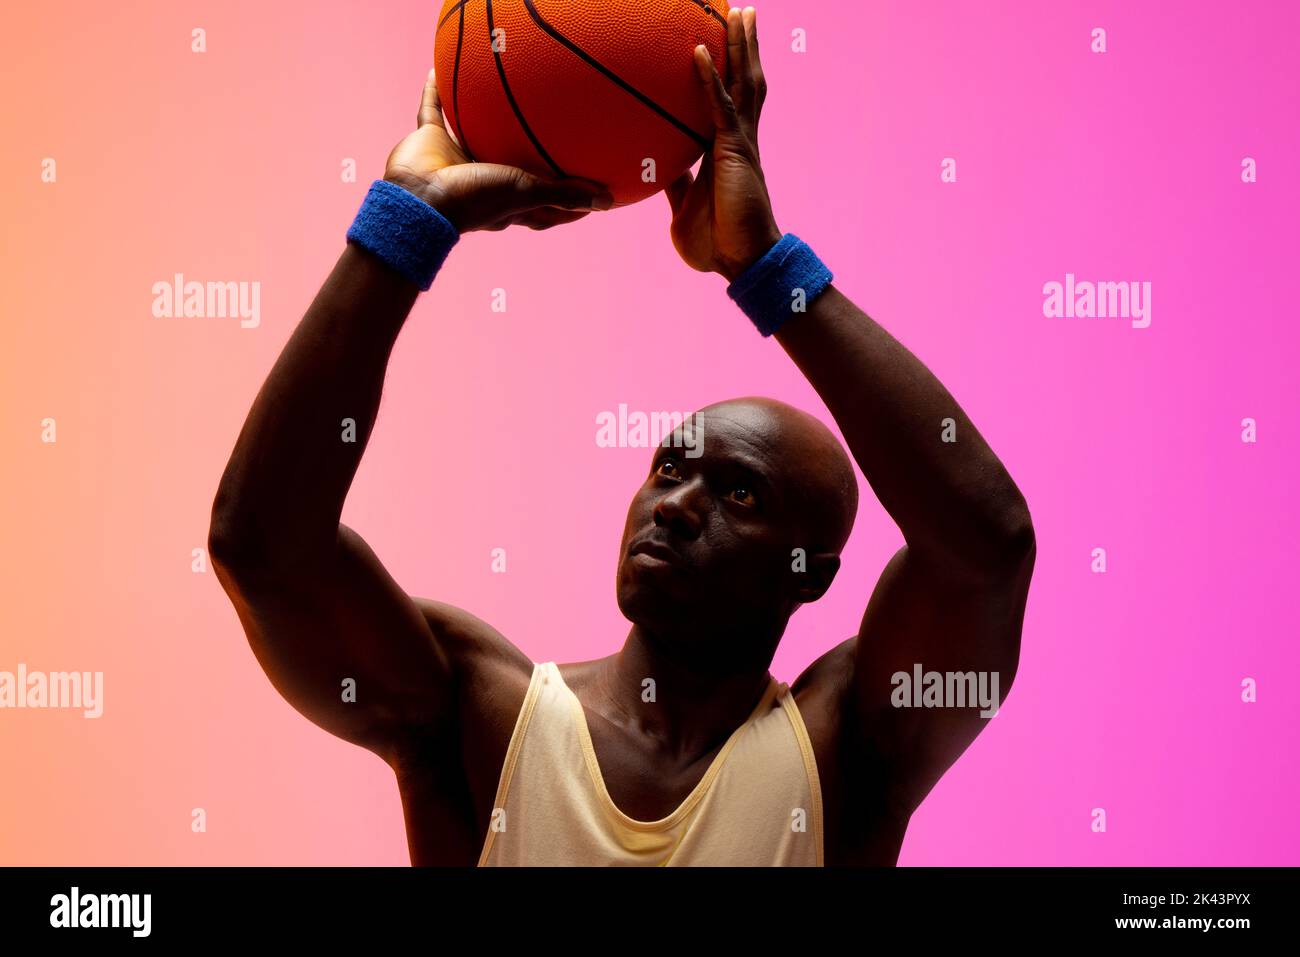 Image of african american basketball player throwing basketball on orange to pink background. Sports and competition concept. Stock Photo